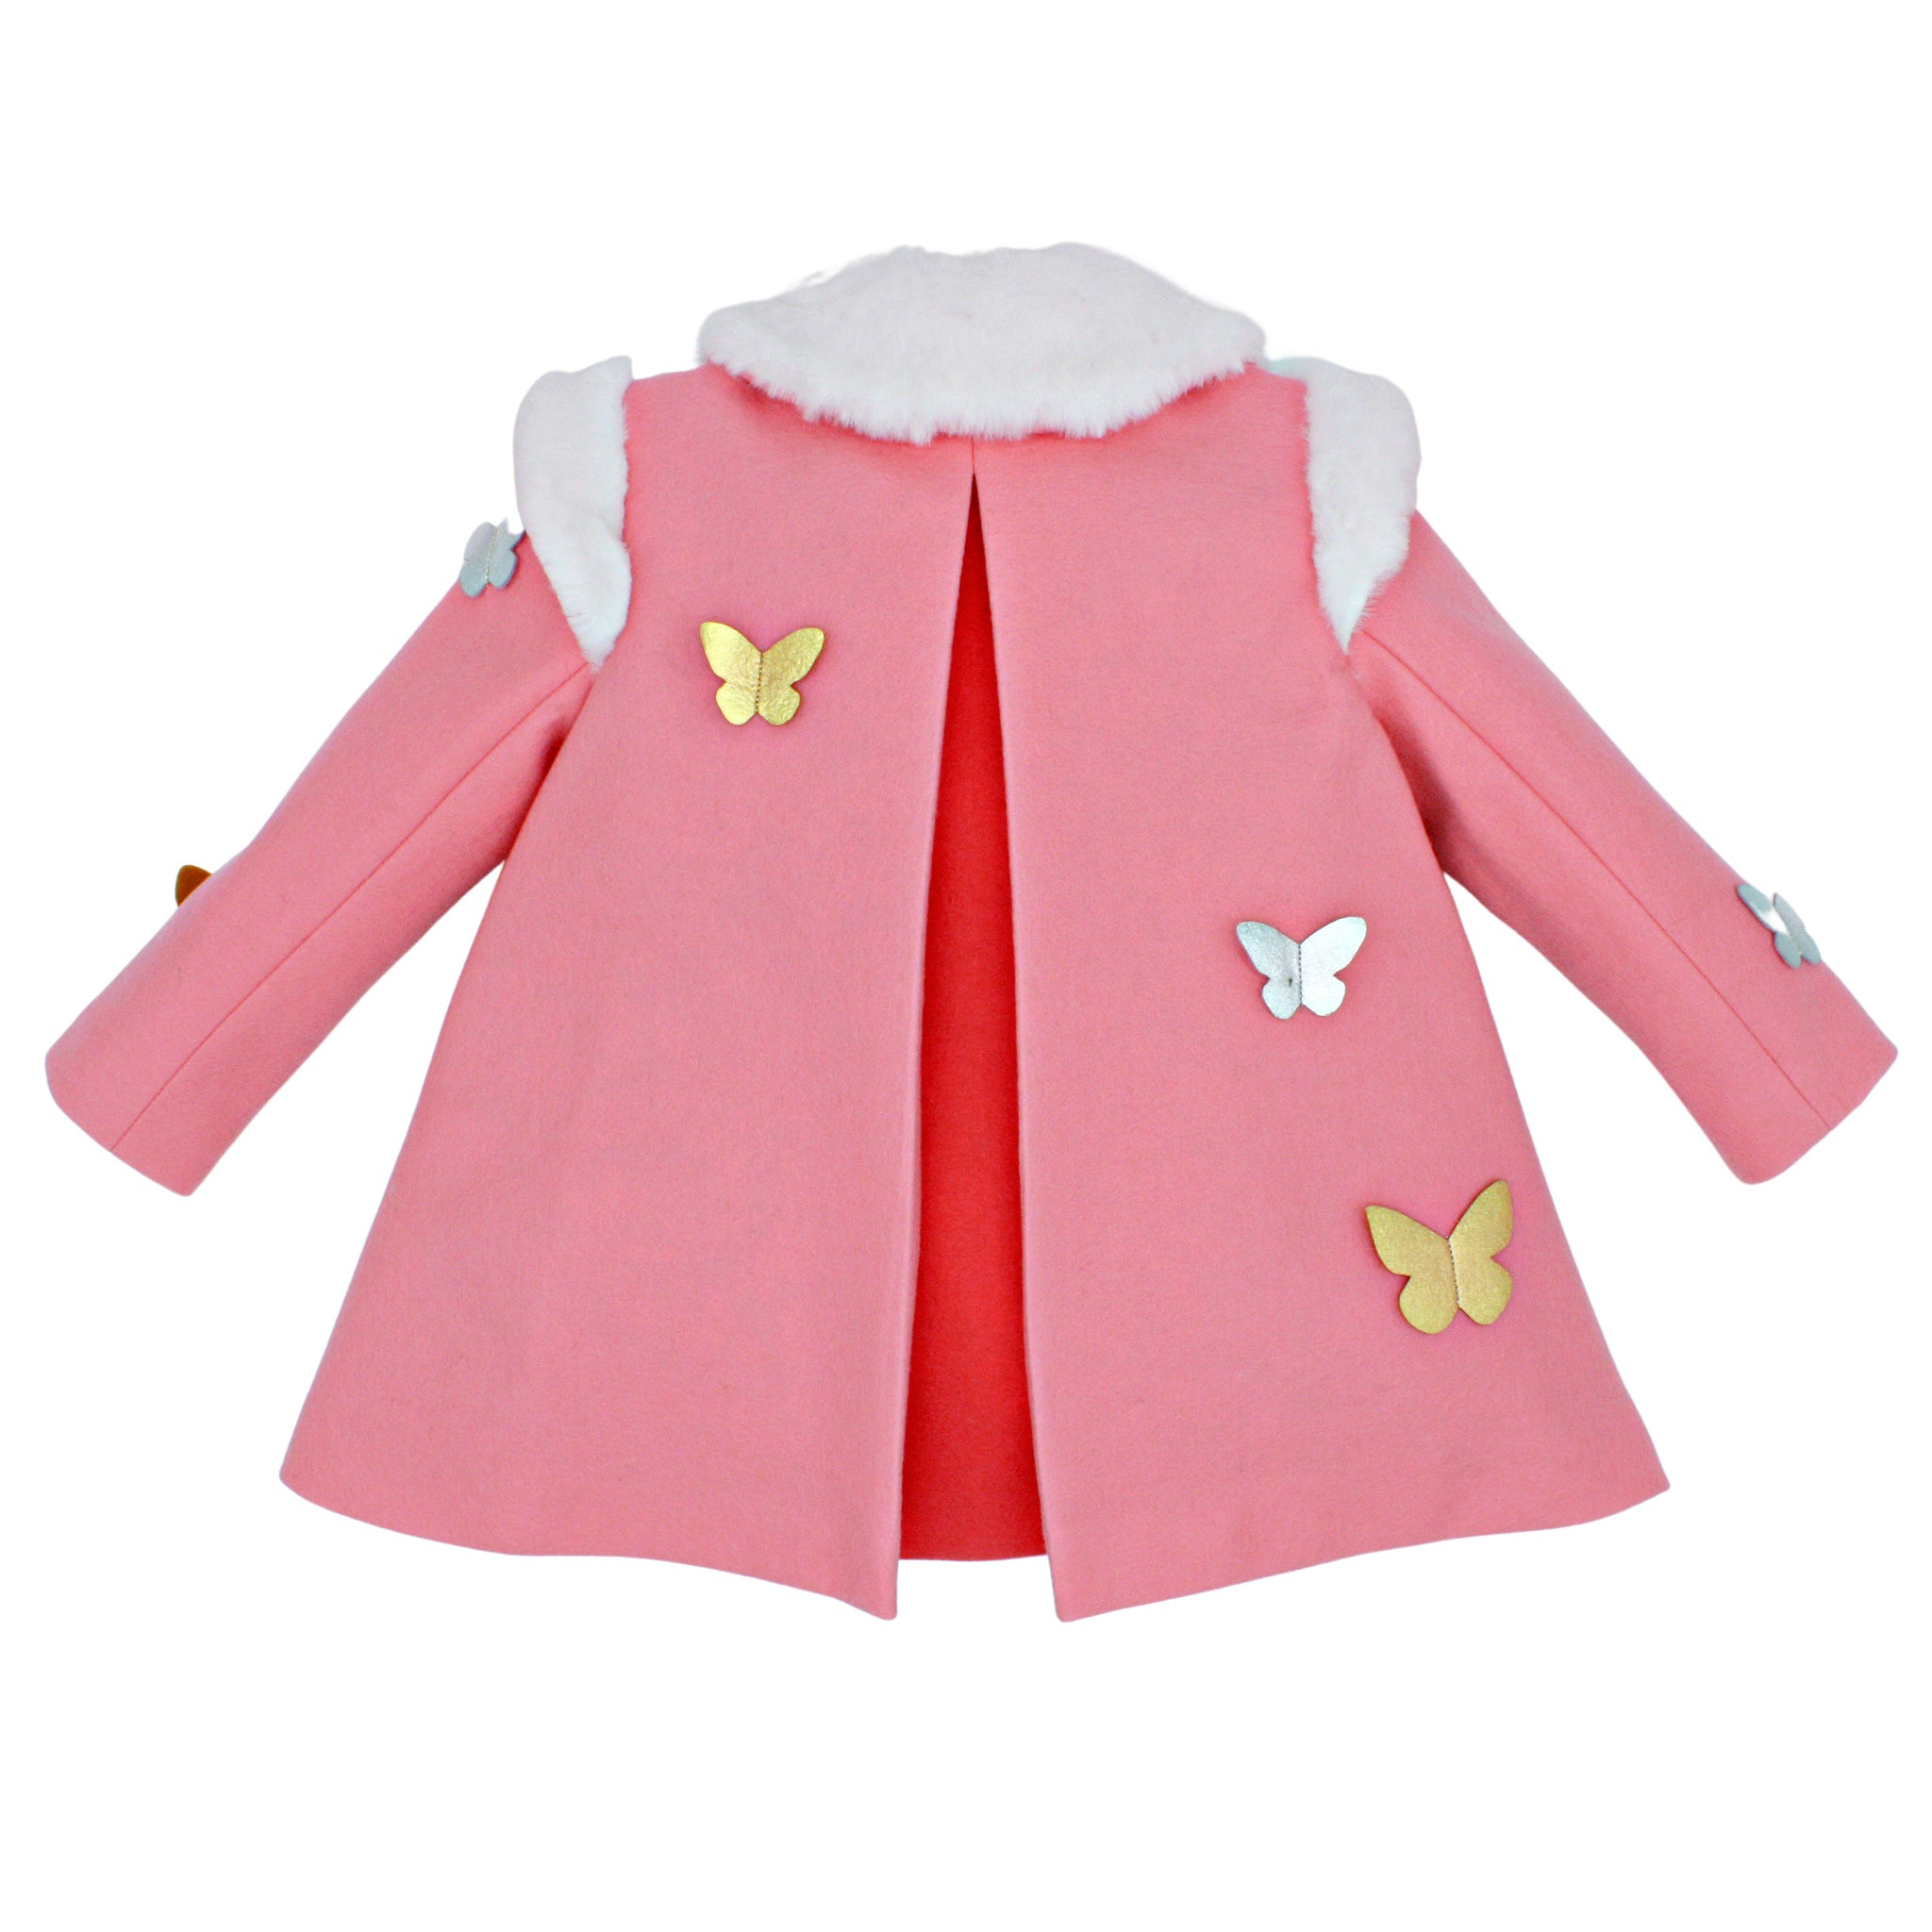 Limited Edition Pink Rainbow Dreamer Coat